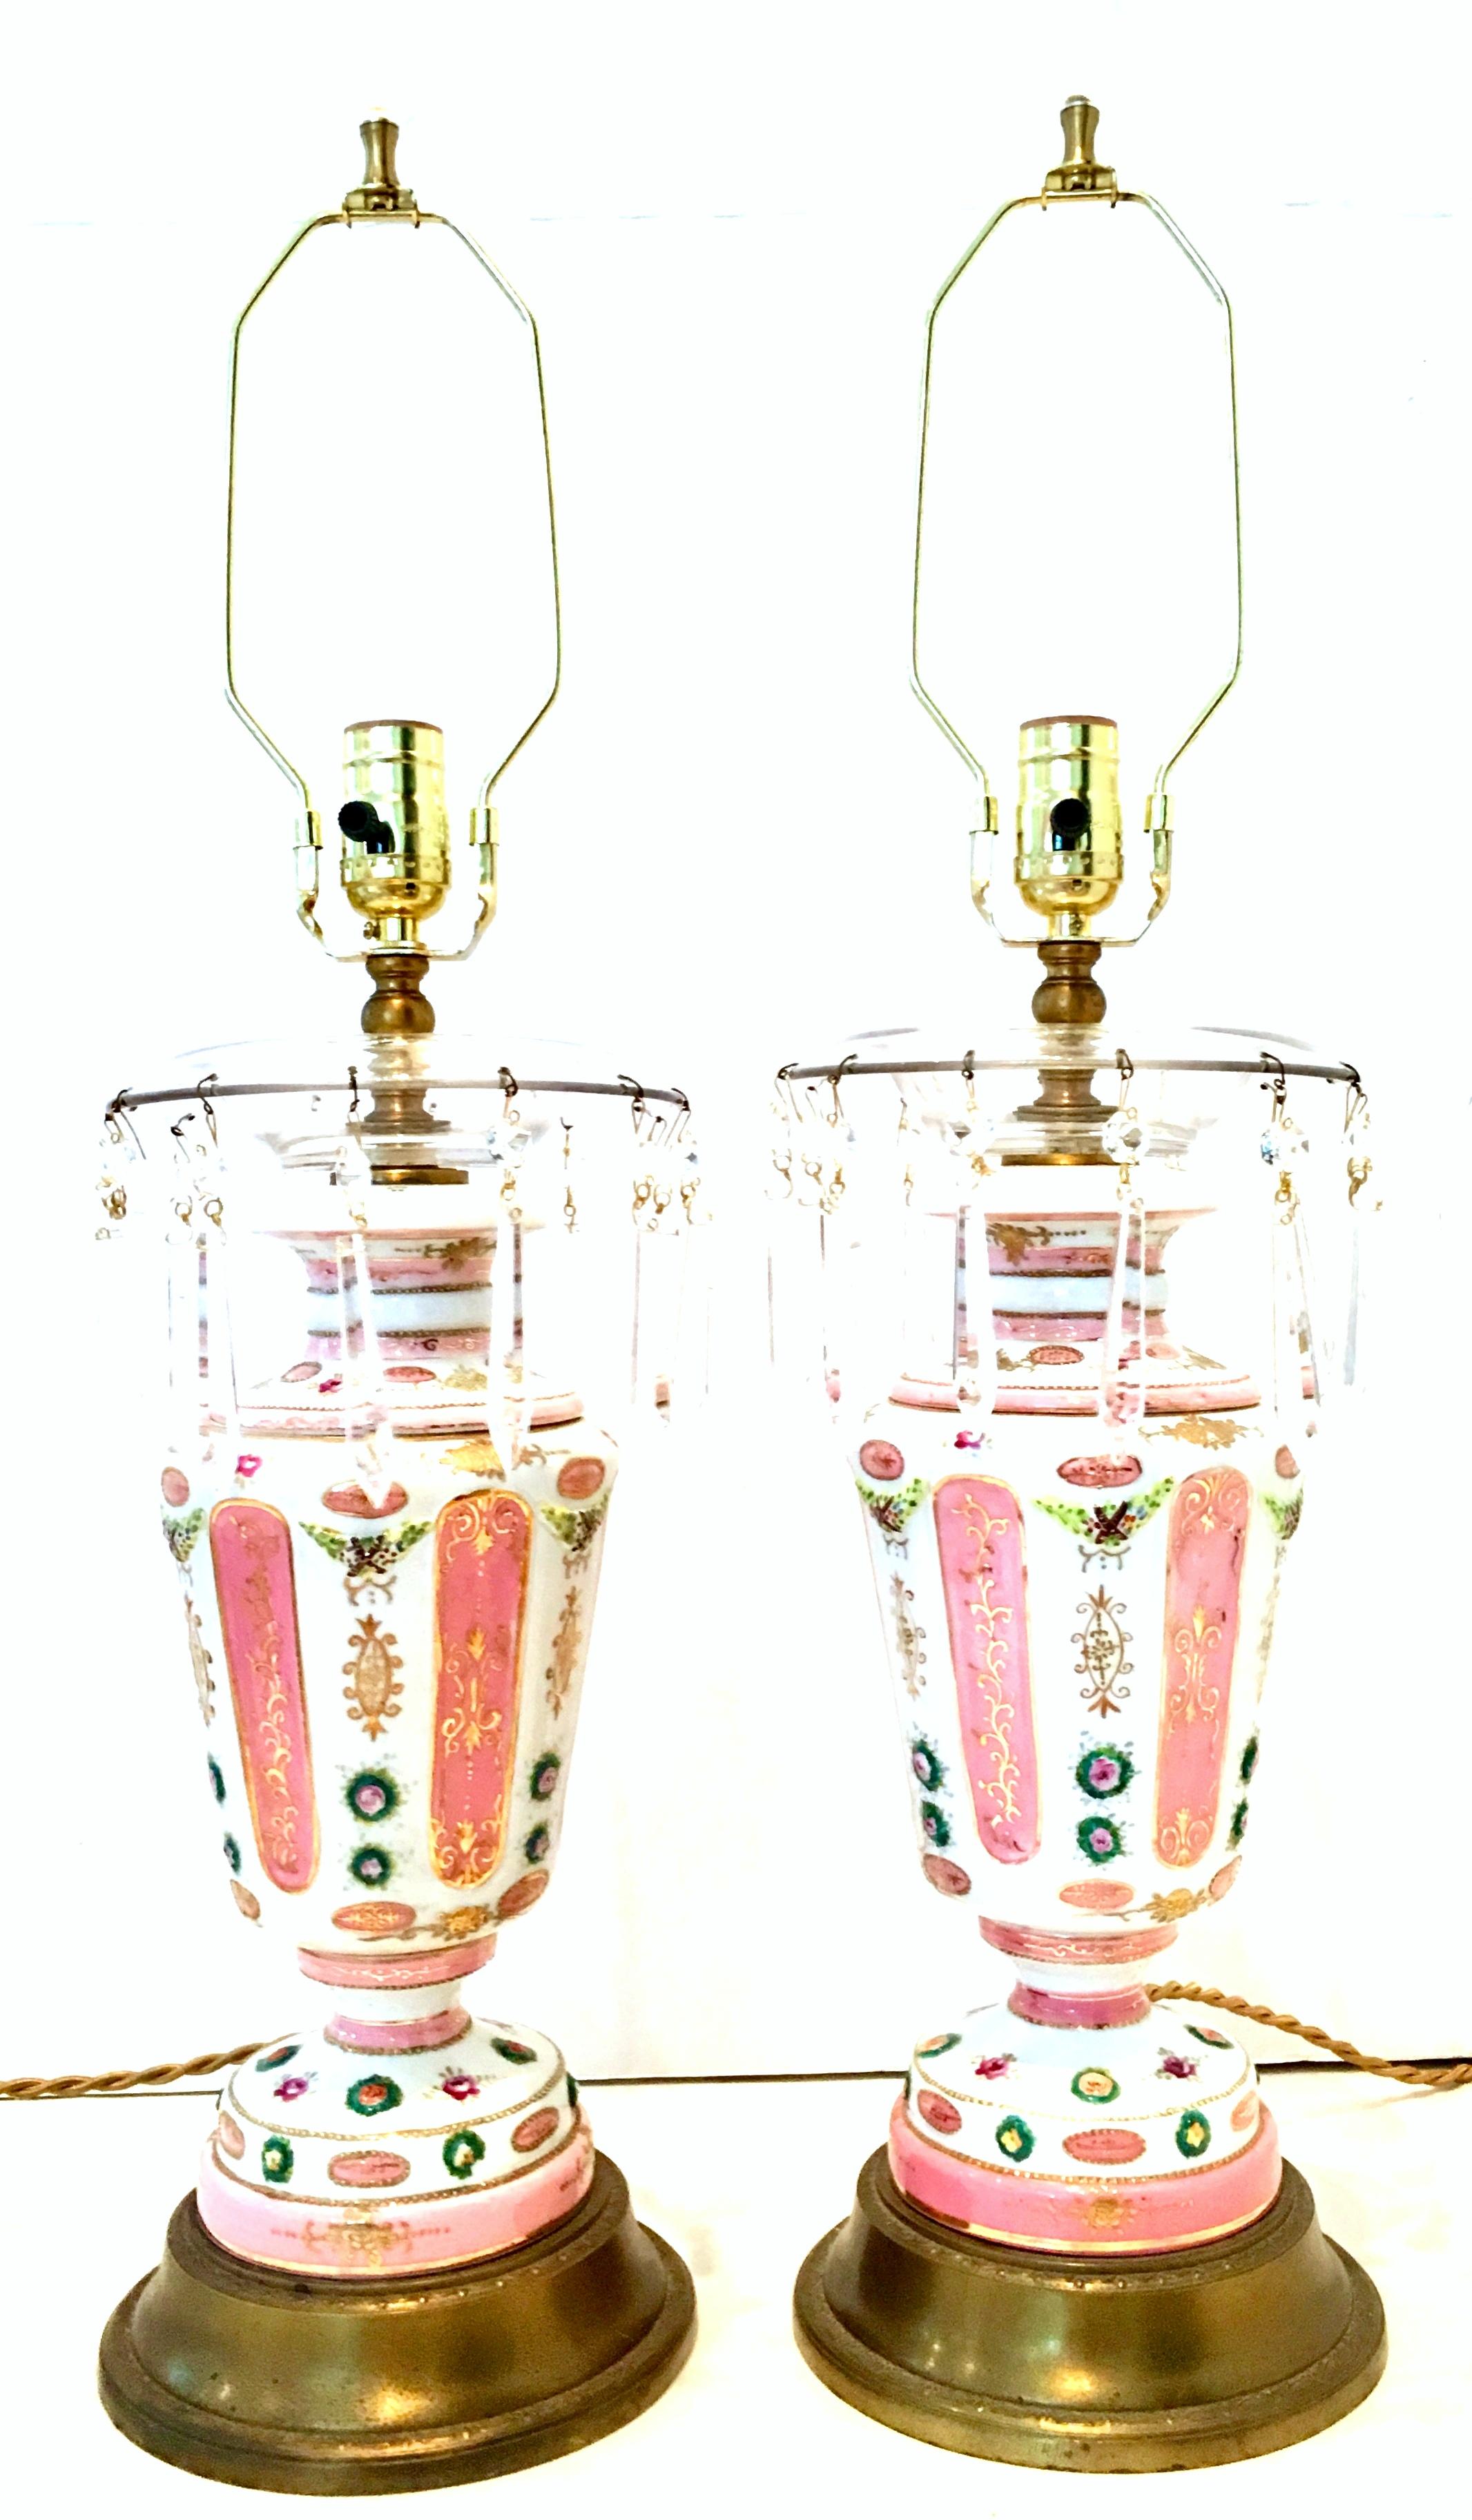 Antique pair of French Continental style hand painted porcelain and crystal prism table lamps. These rare and stunning 22-karat raised gold detail and hand painted lamps, feature a bright white ground with pink and green tones. Original